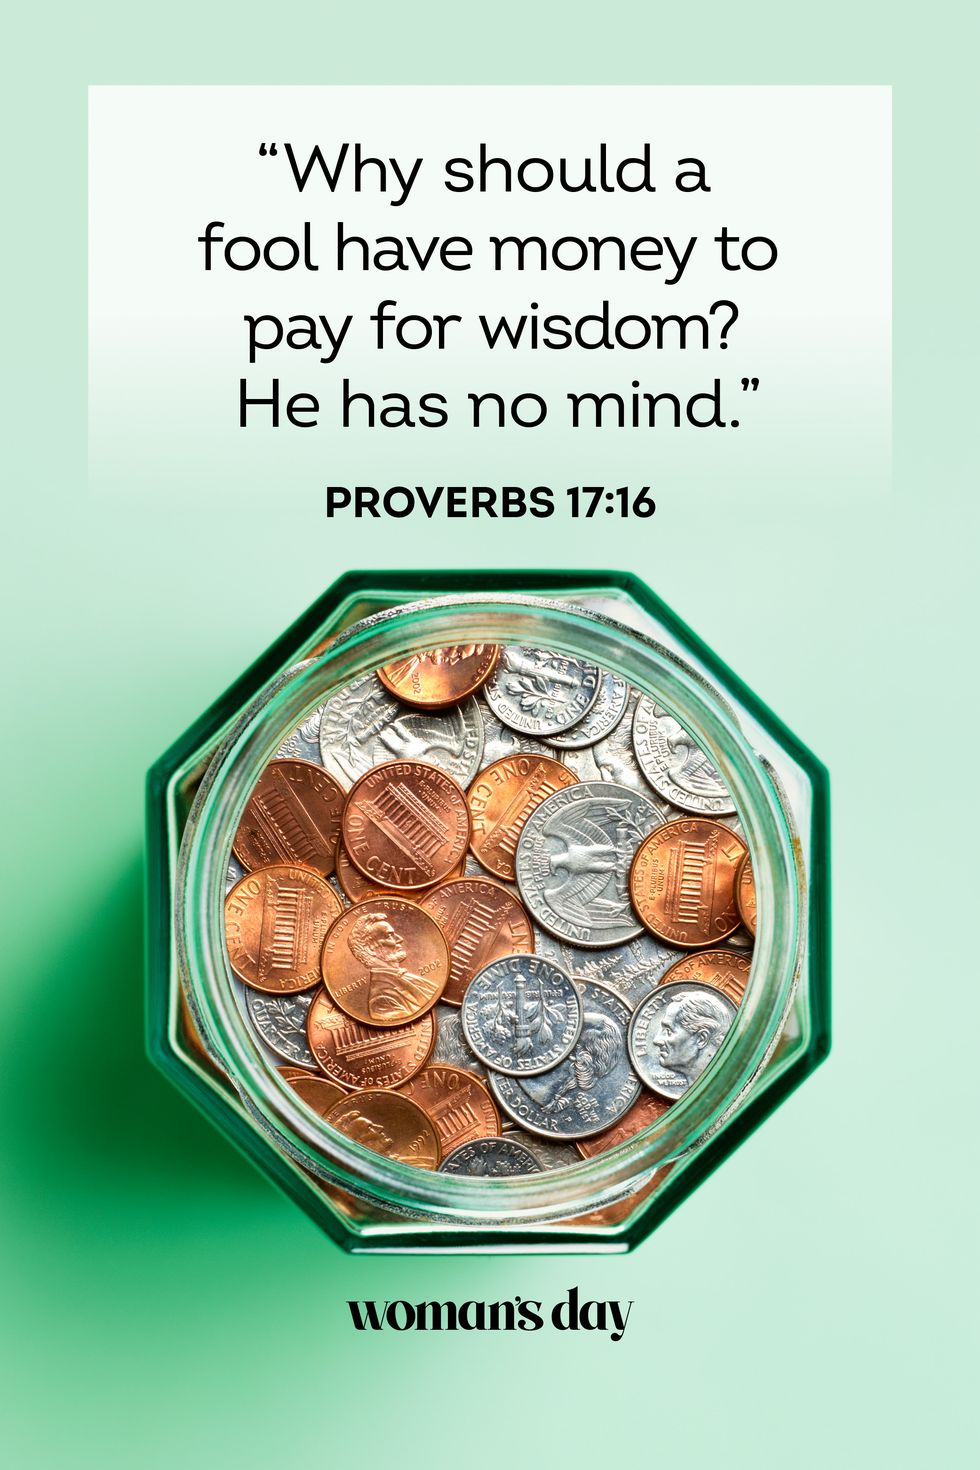 25 Important Bible Verses About Money and Finances